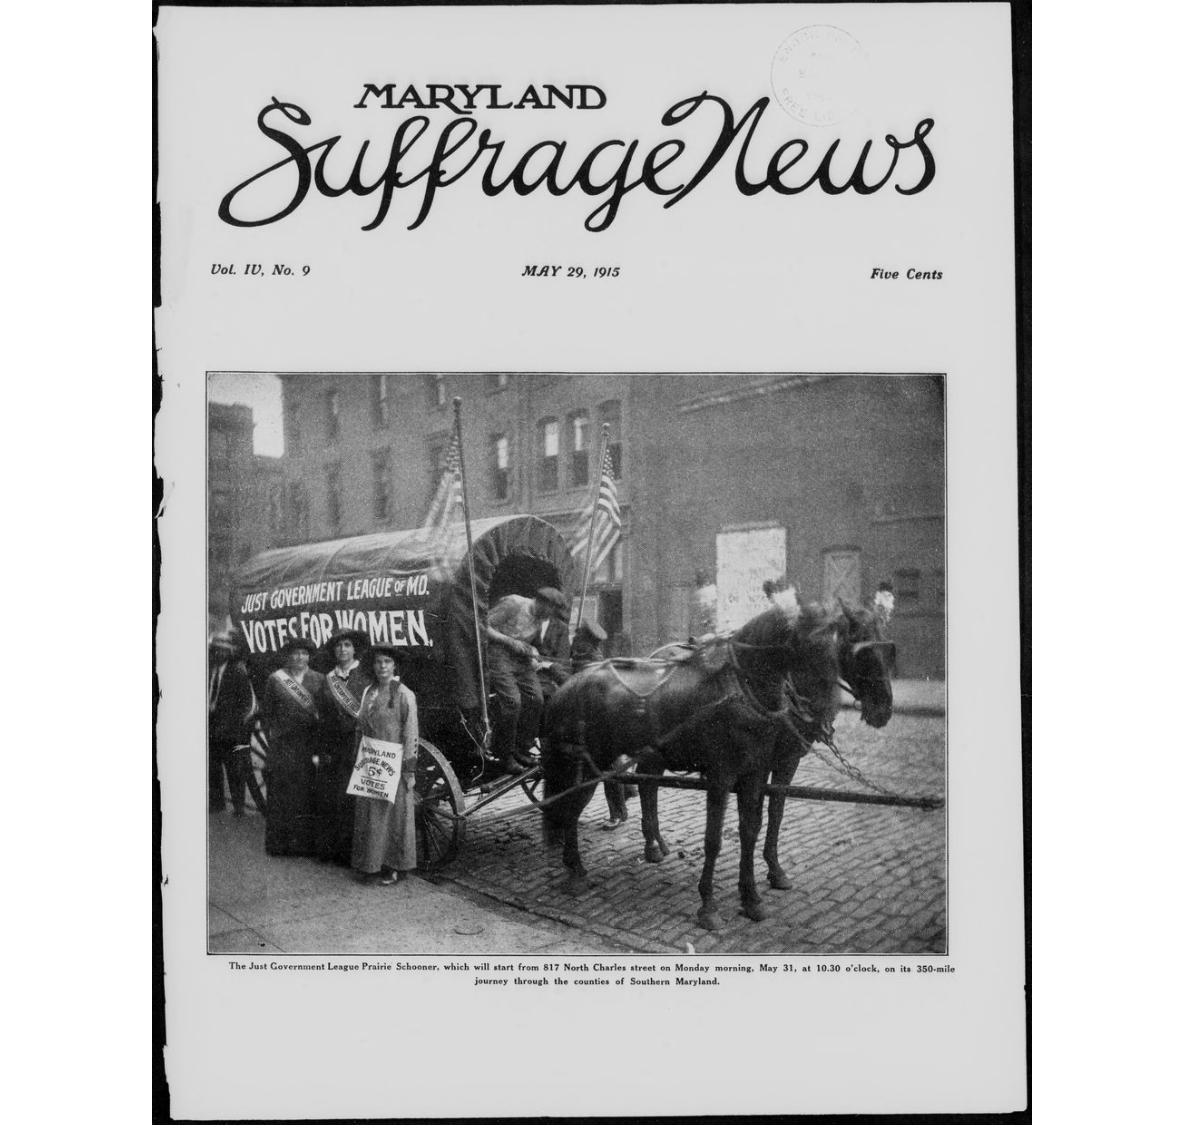 The cover of Maryland Suffrage News featuring women in front of a horse drawn wagon that says "votes for women"